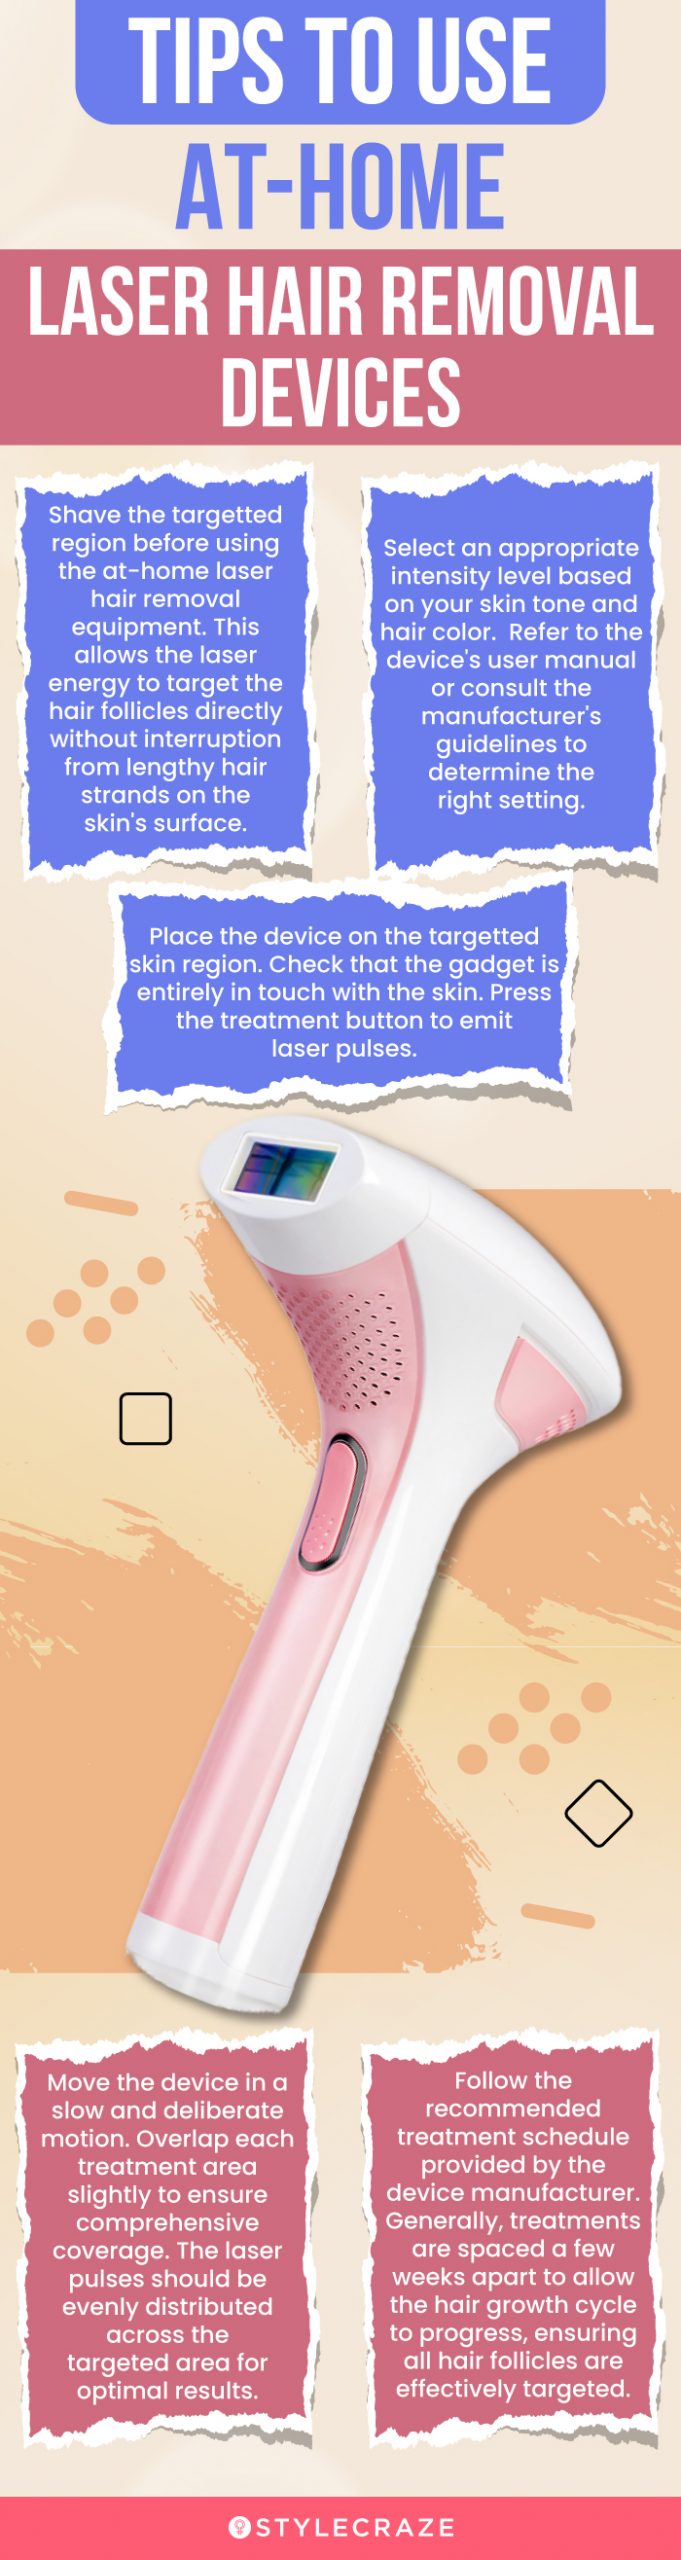 Tips To Use At-Home Laser Hair Removal Devices (infographic)